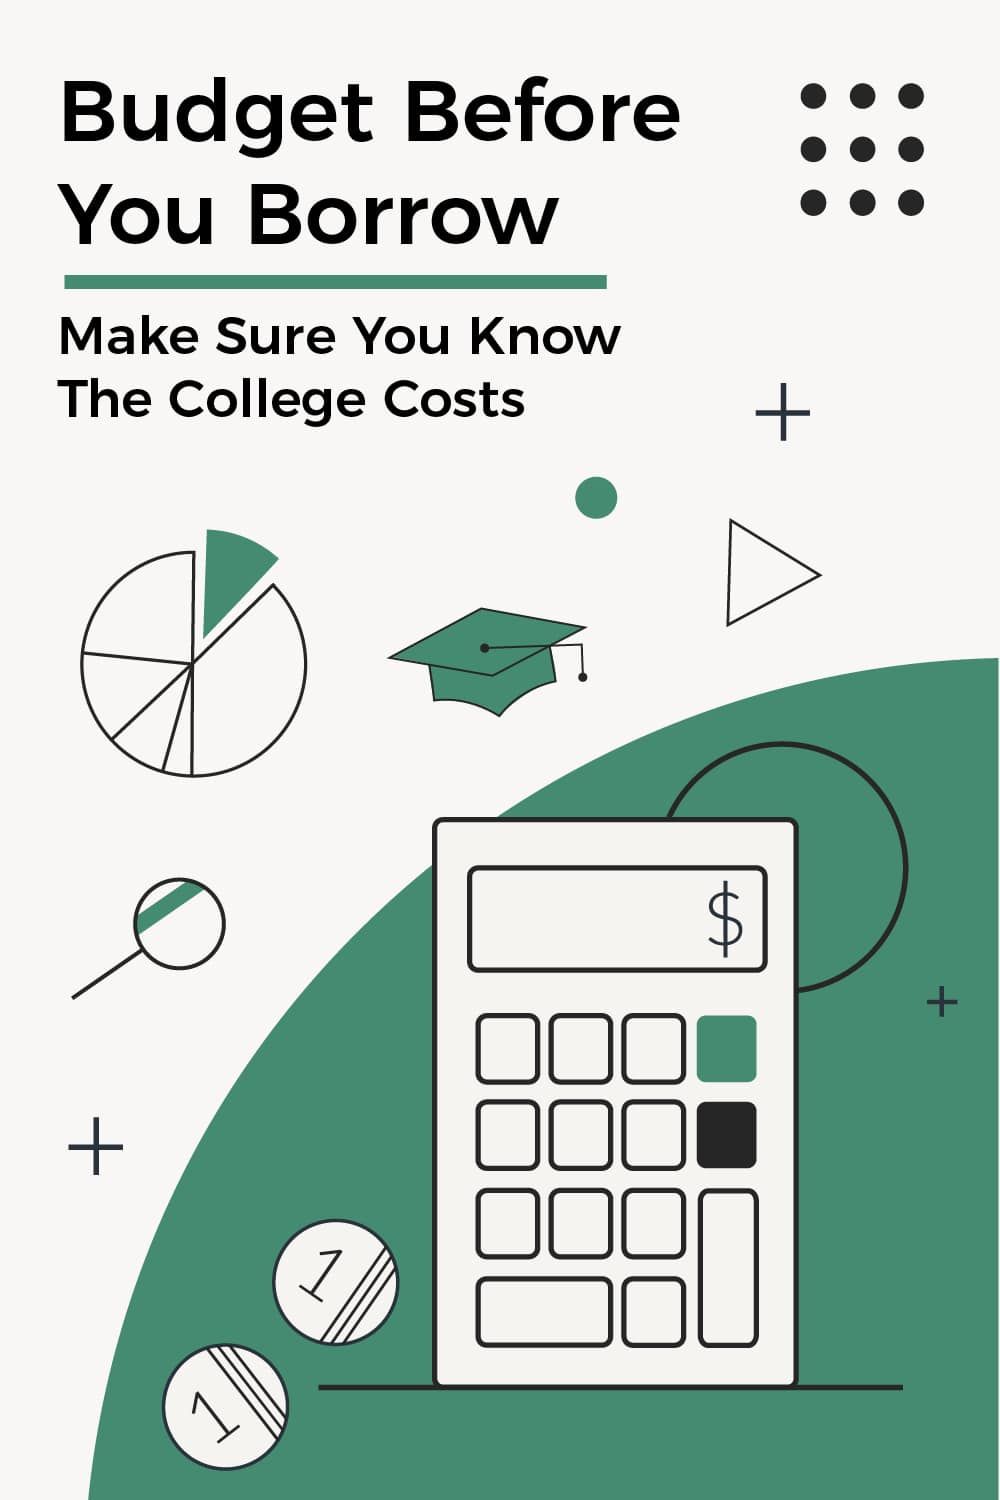 How to Budget for College